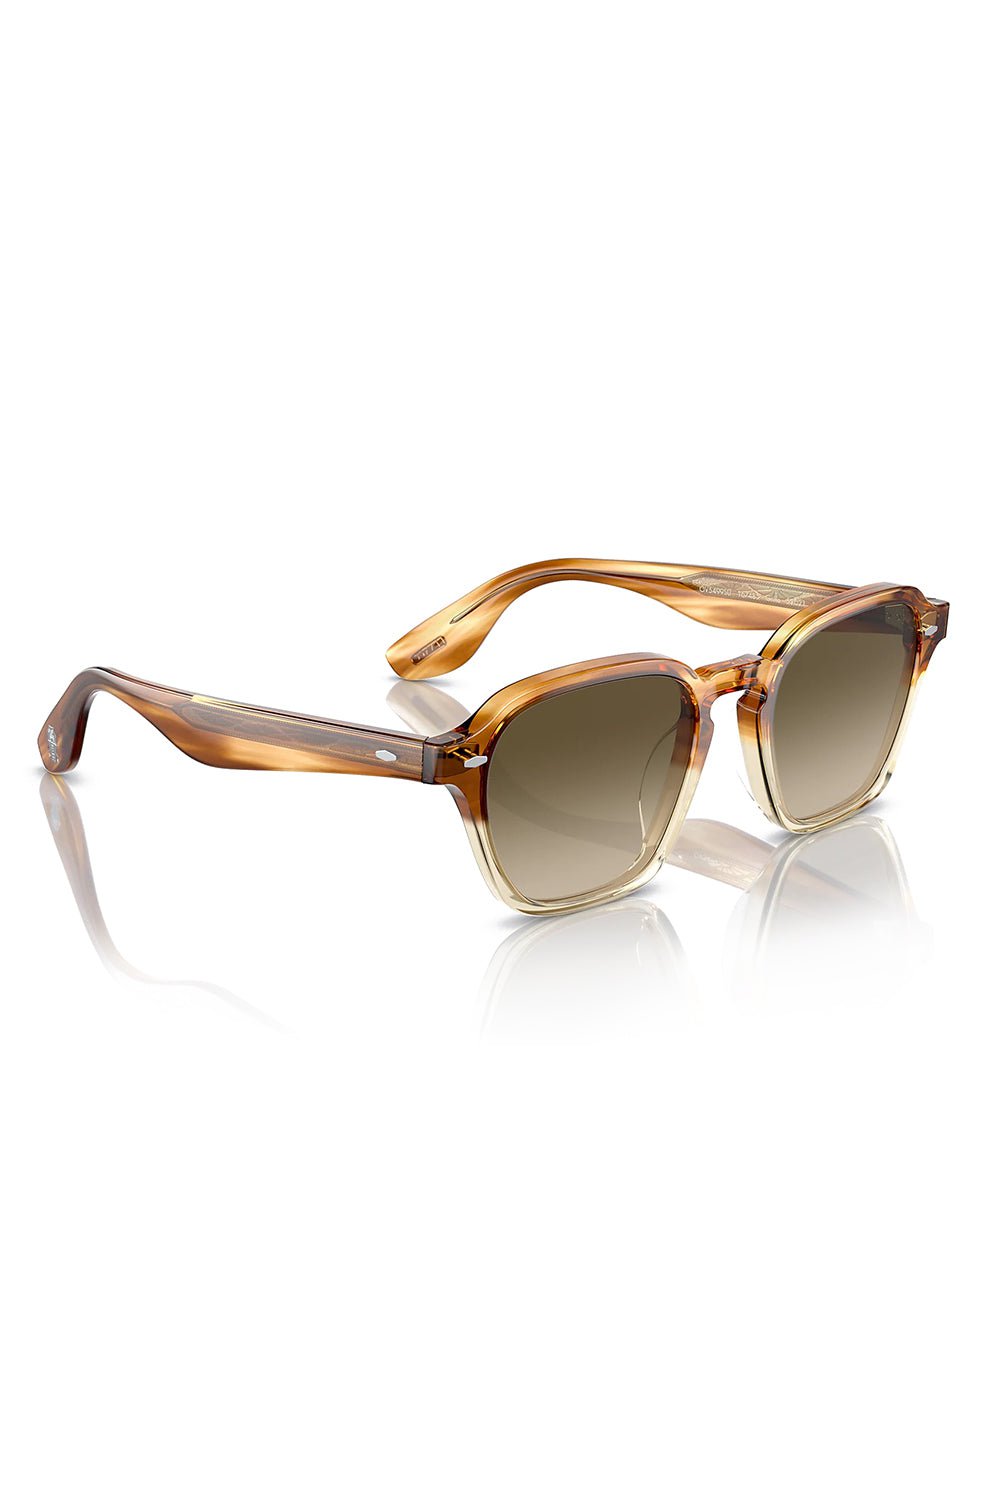 OLIVER PEOPLES-Griffo Sunglasses-HONEY/OLIVE